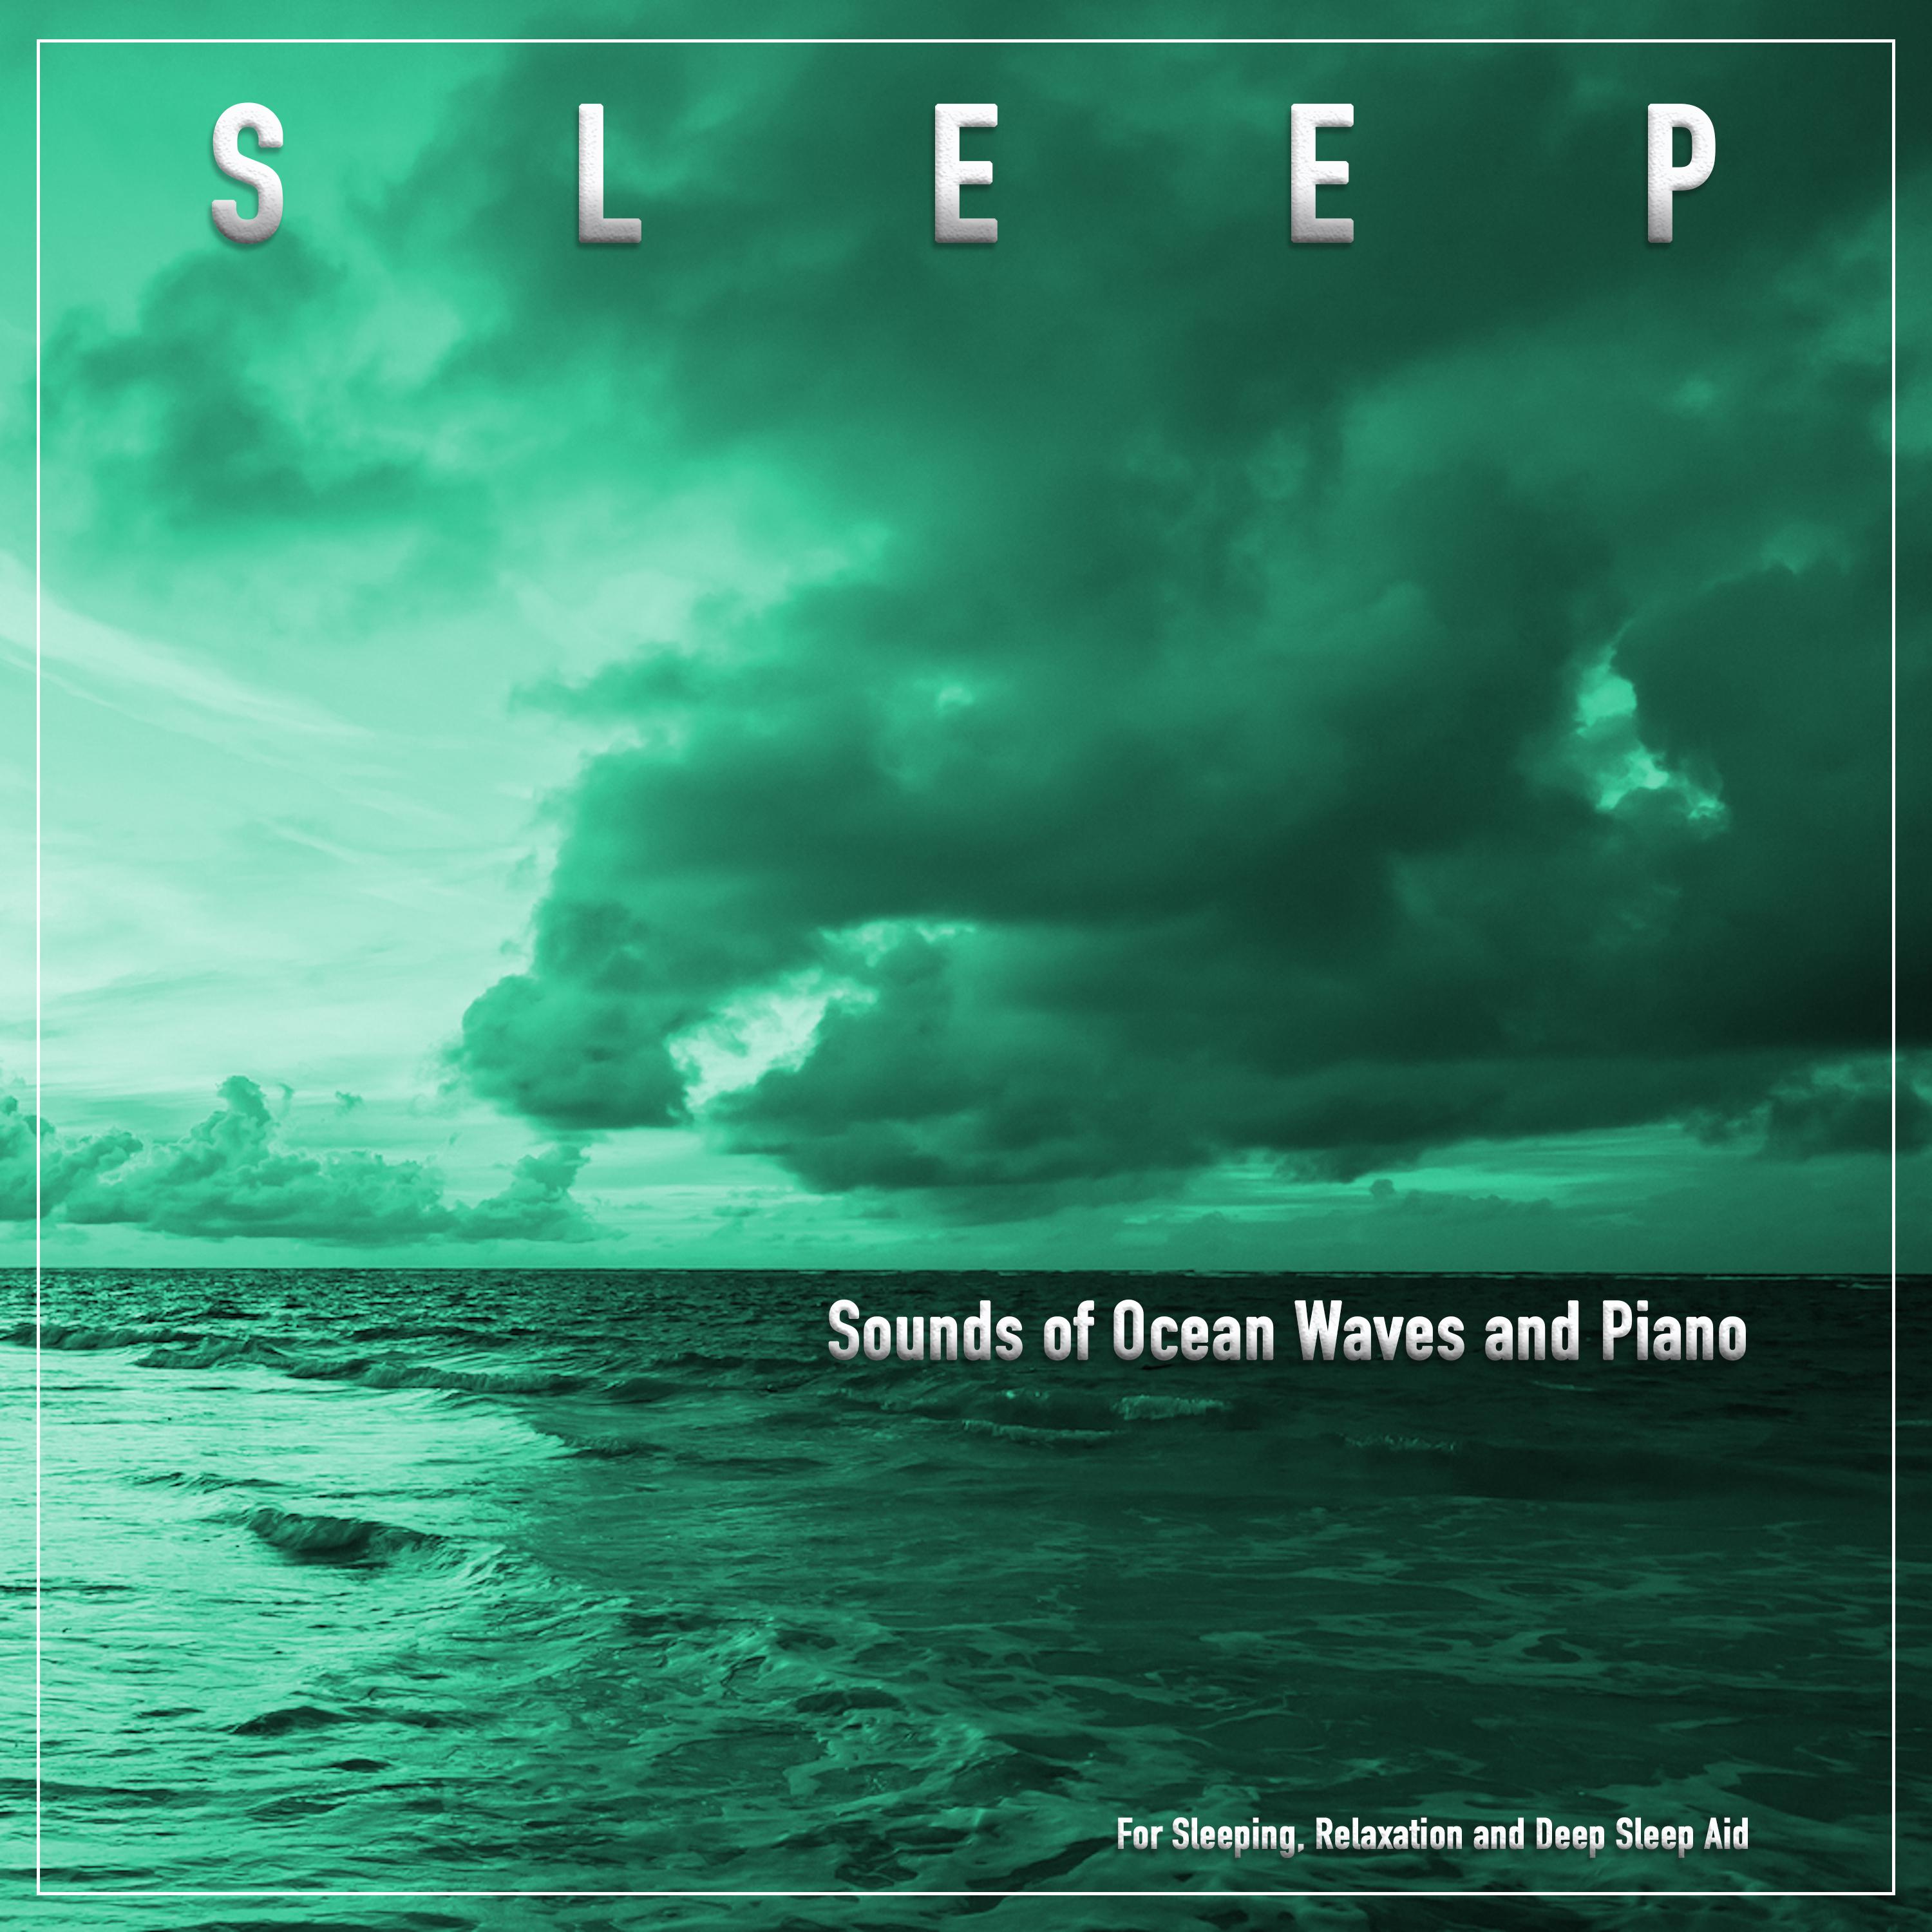 Piano Music and Sounds of the Ocean